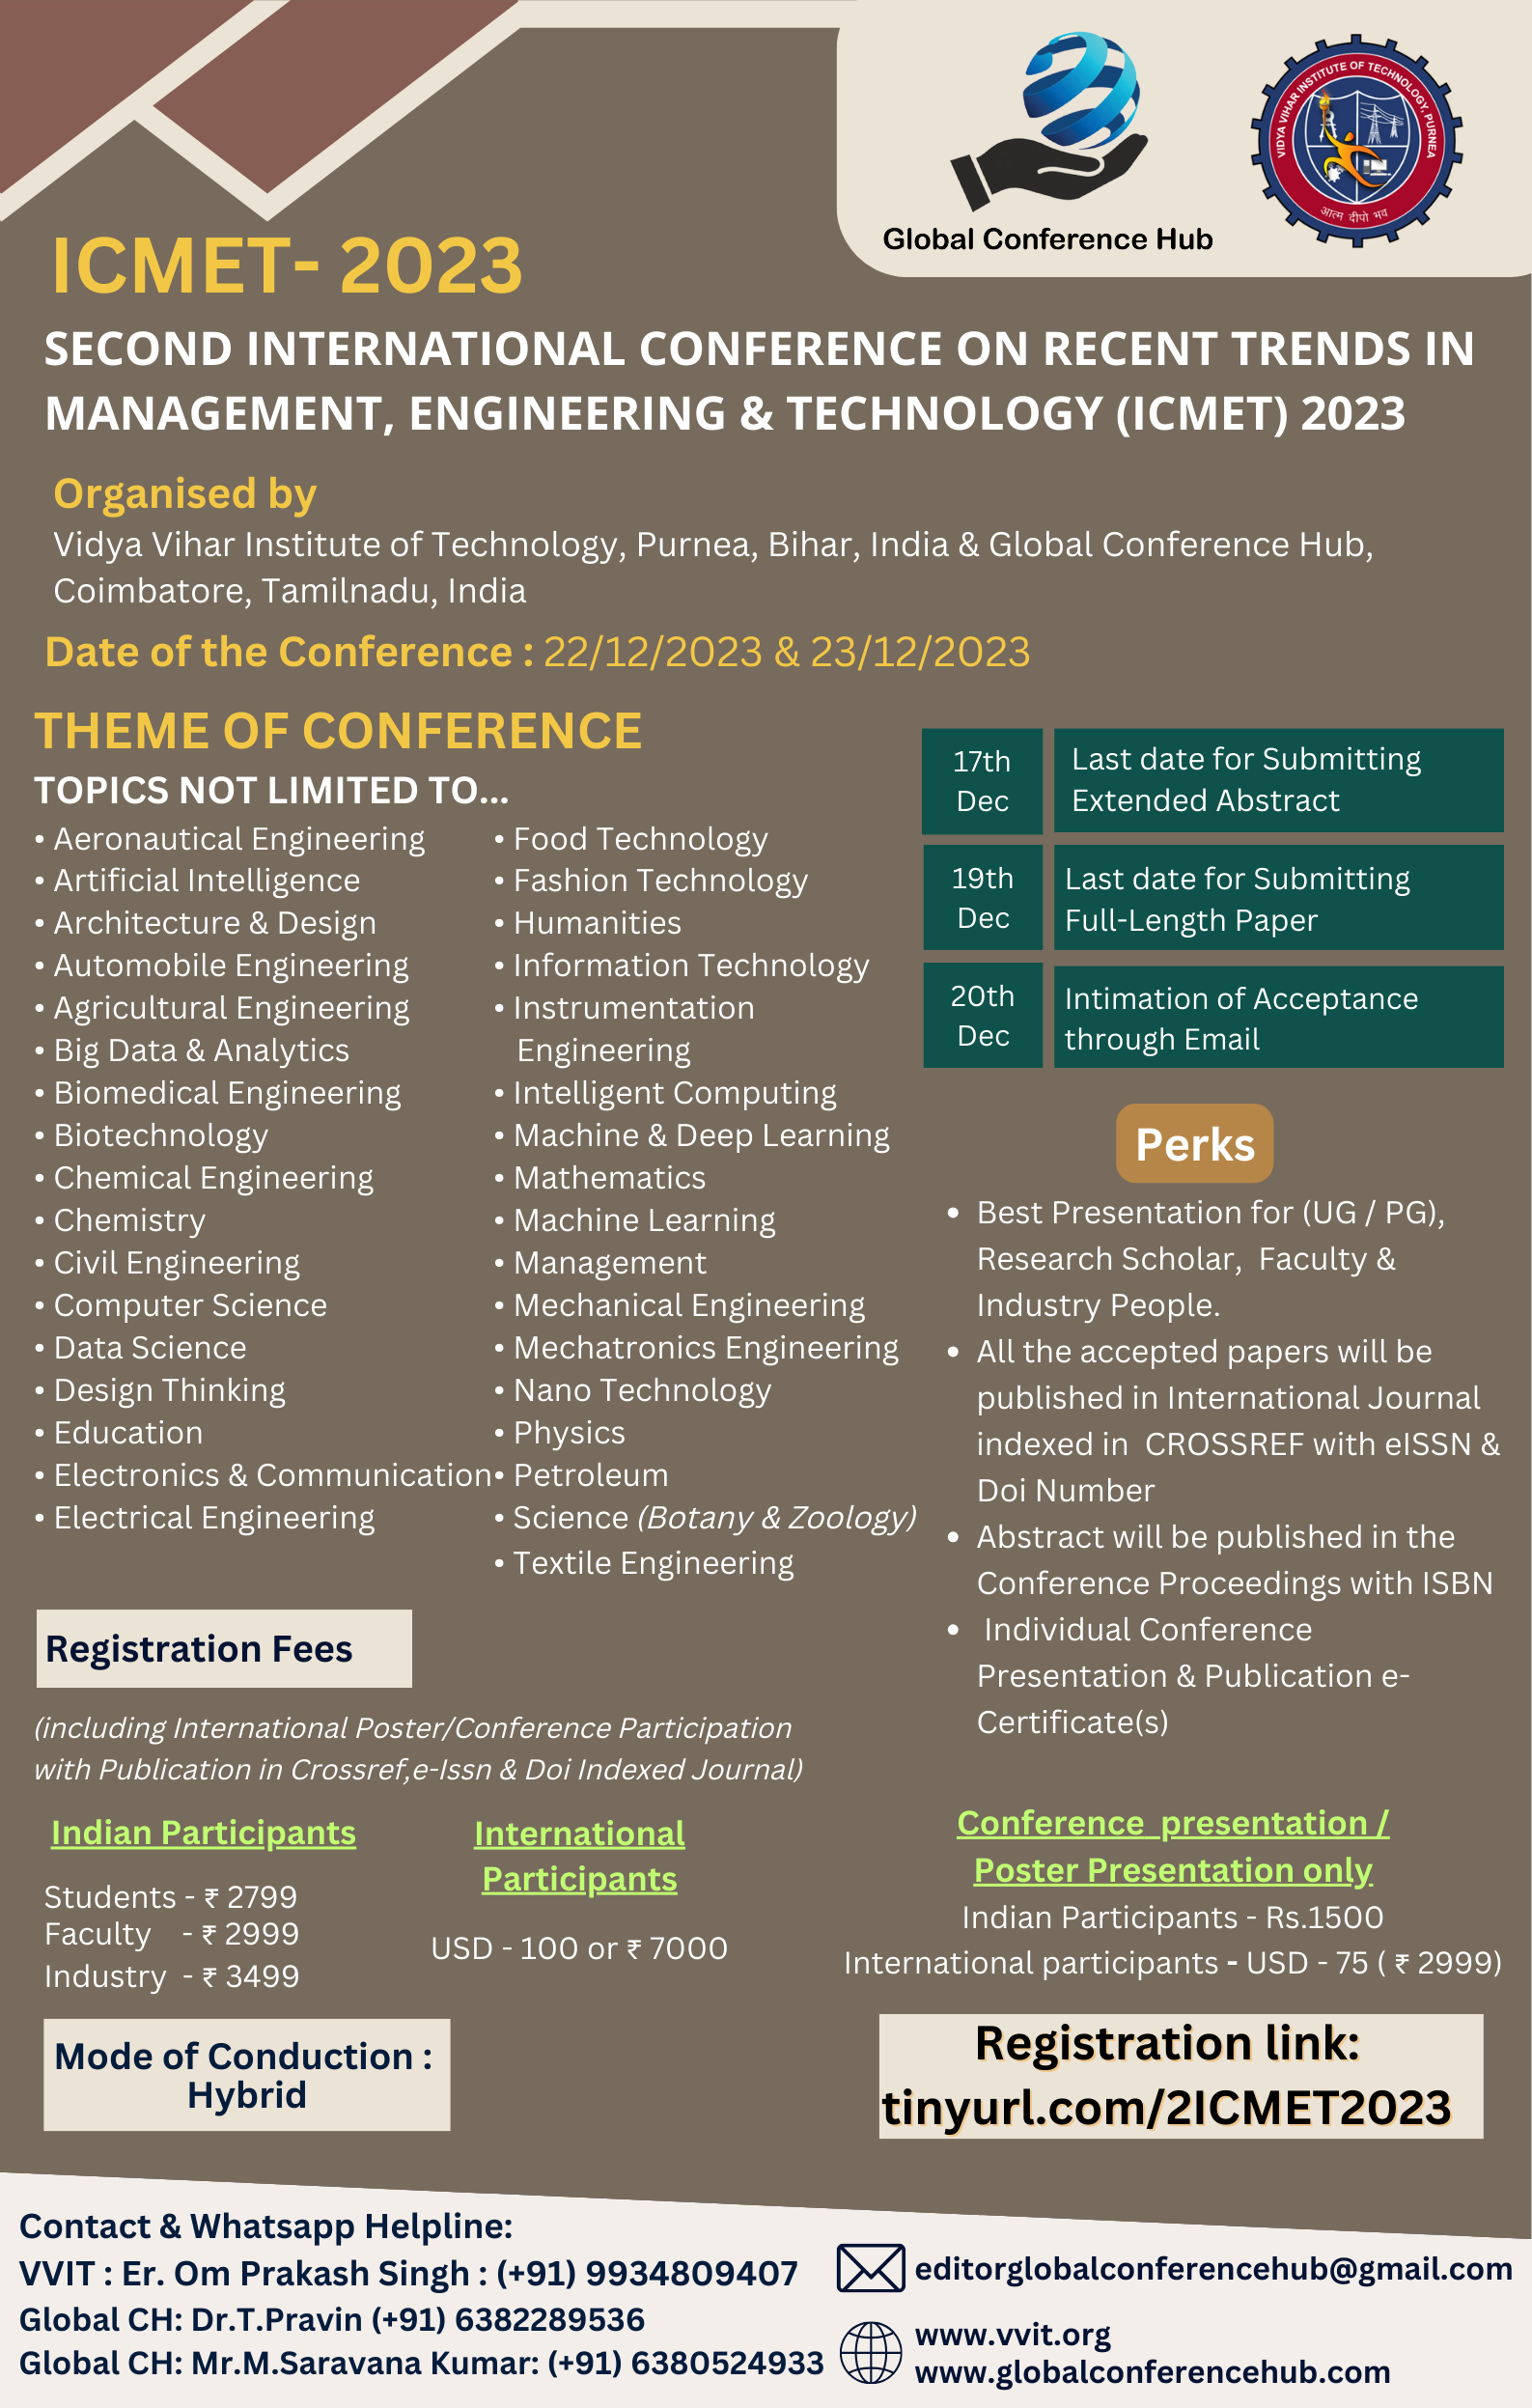 Second International Conference on recent trends in Management, Engineering and Technology ICMET 2023